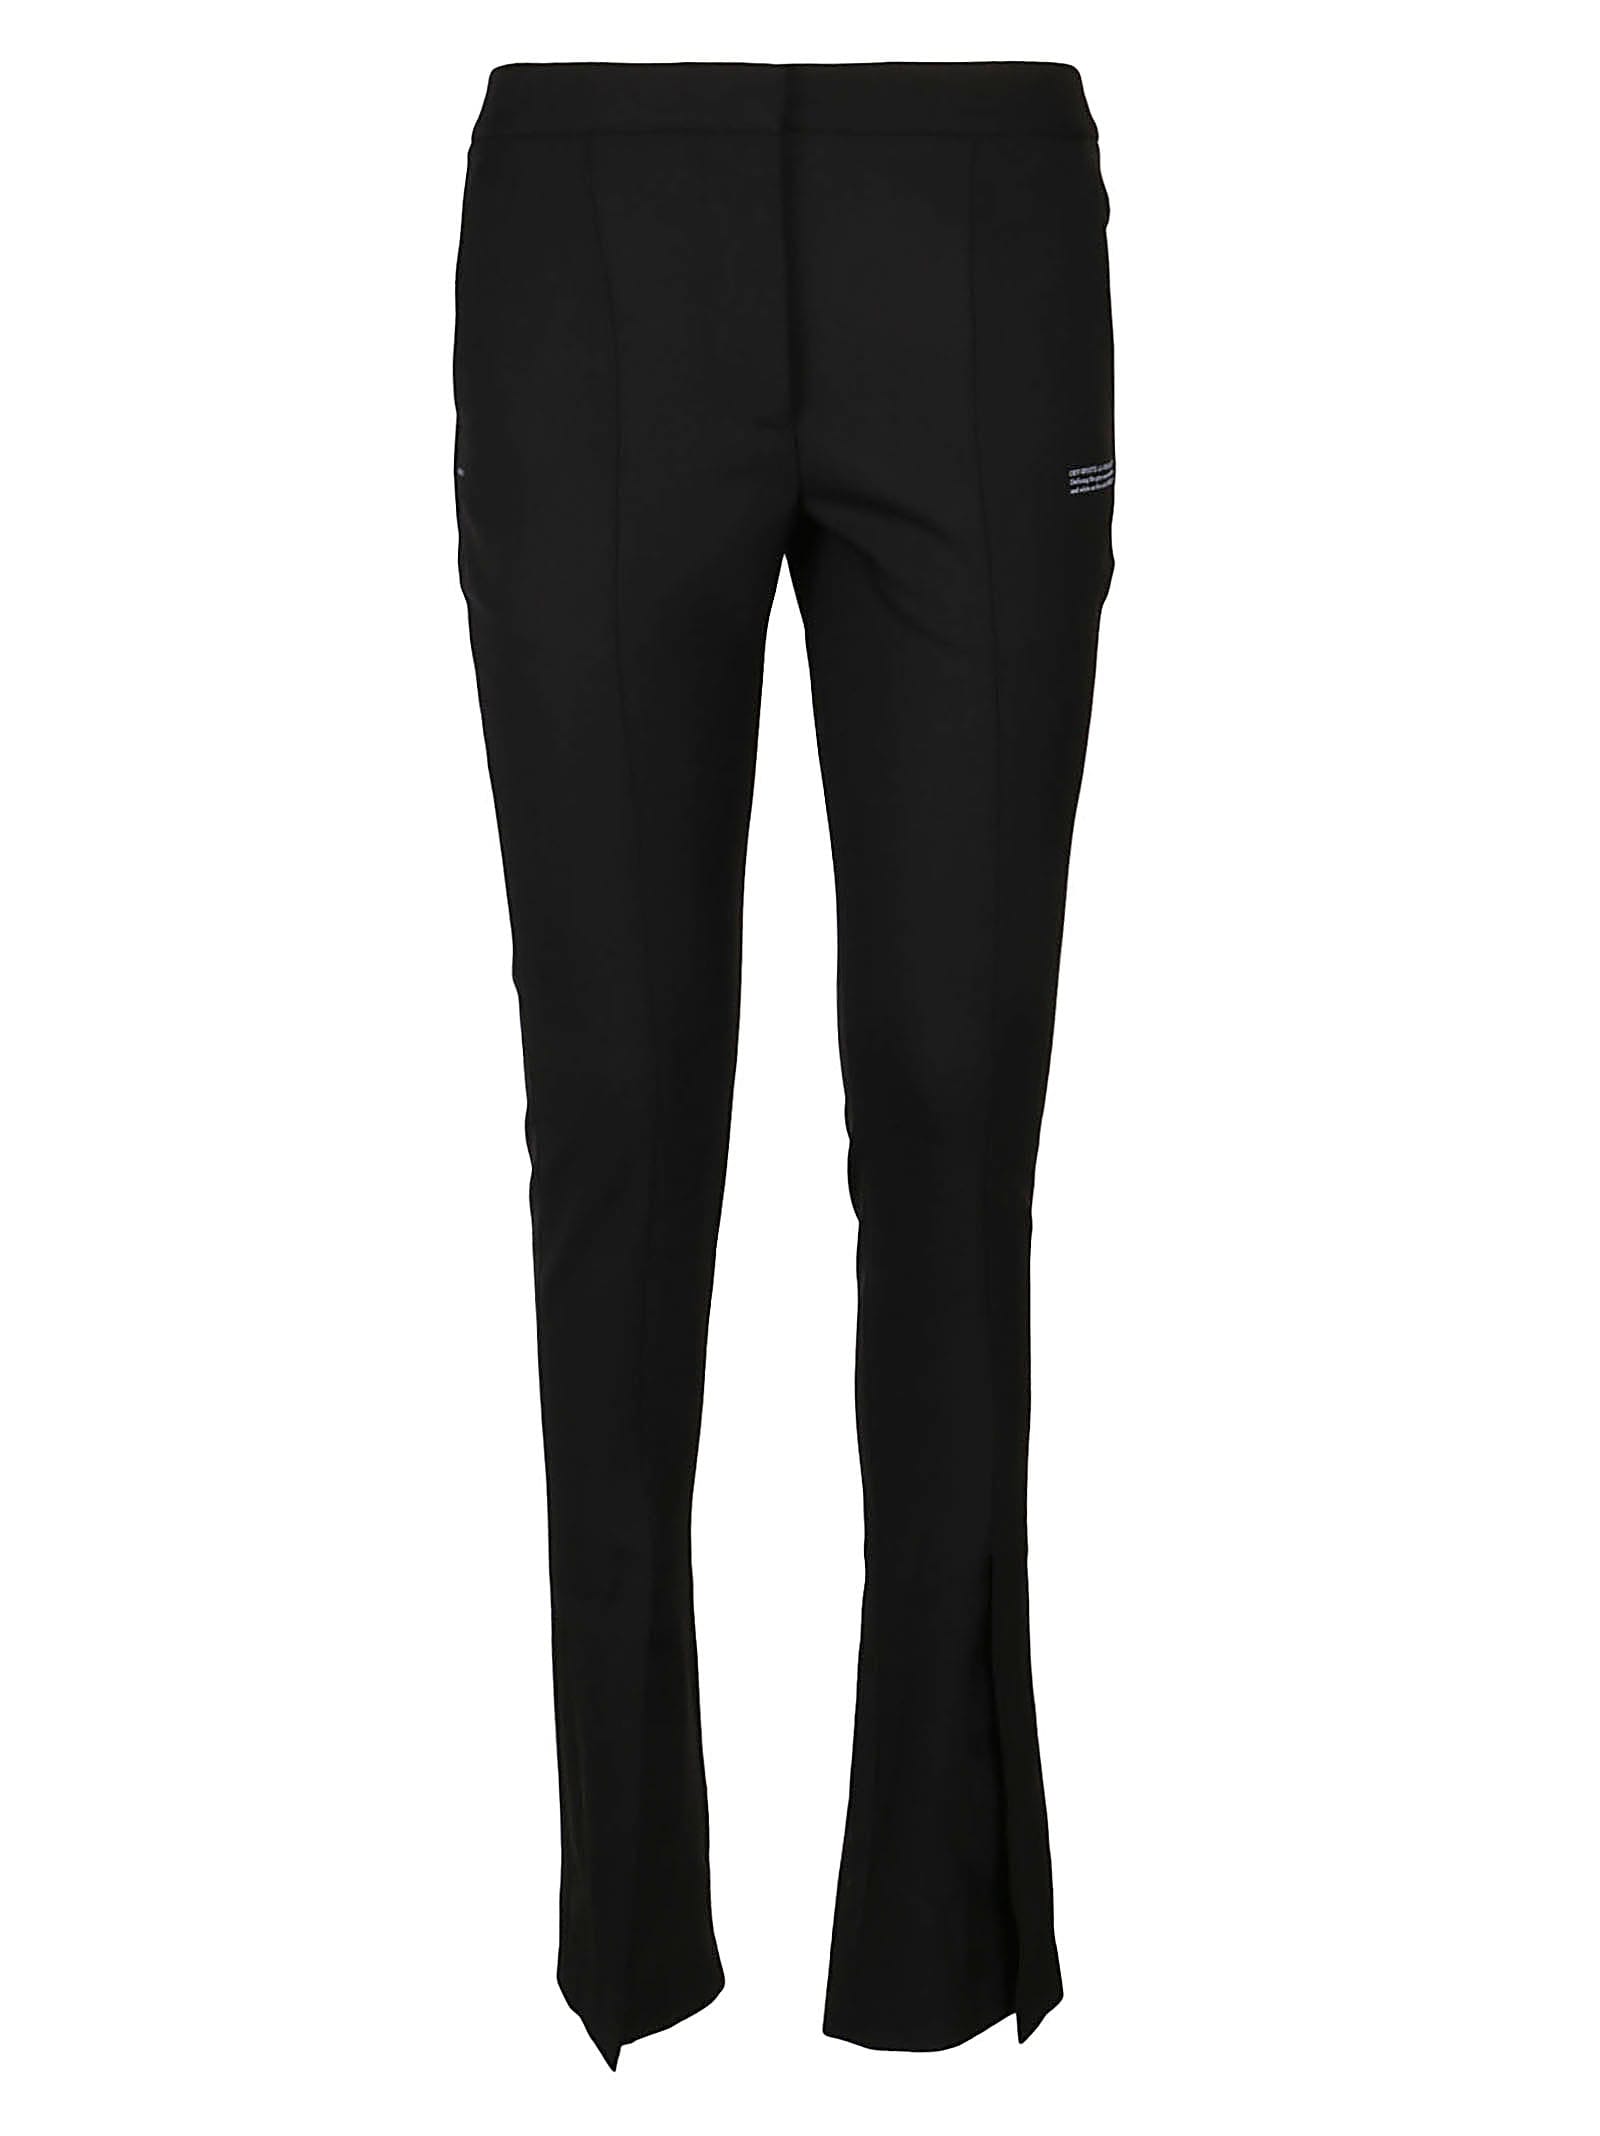 Corporate Tailored Pant